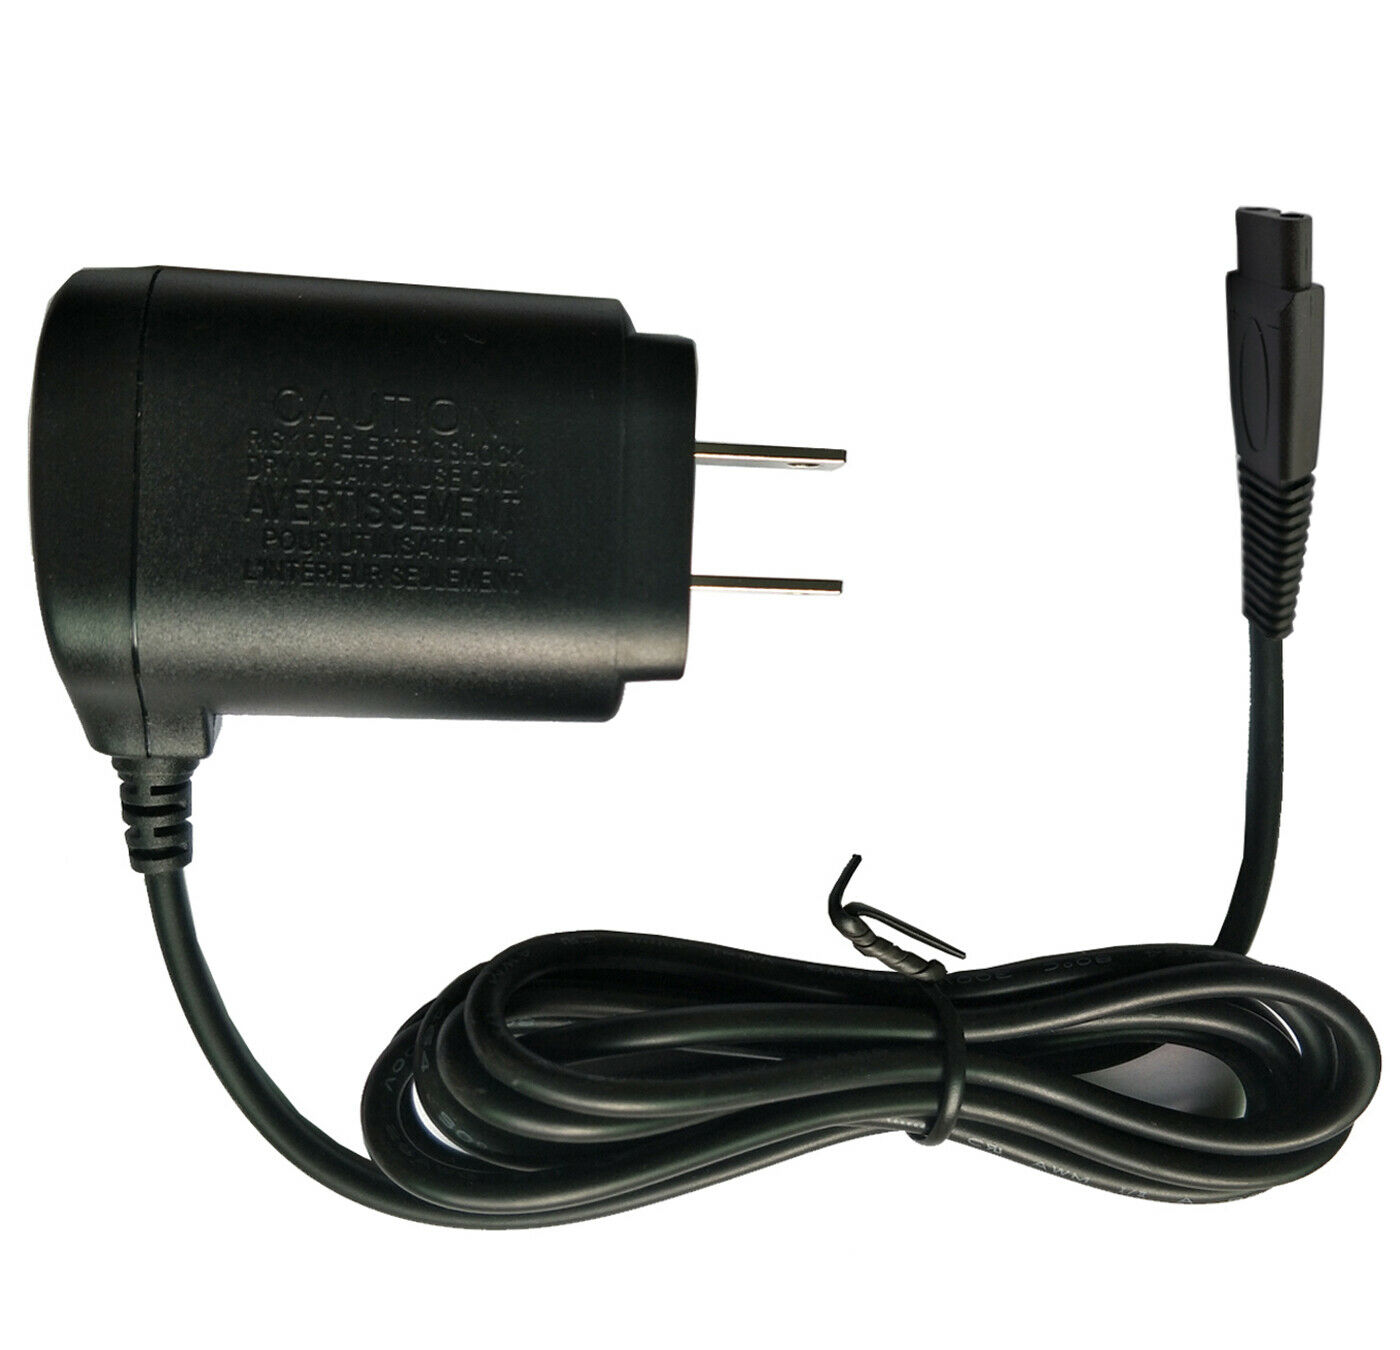 AC Adapter for Manscaped The Lawn Mower 3.0 Groin Grooming Hair Trimmer Shaver Type: AC/DC Adapter Features: Powere